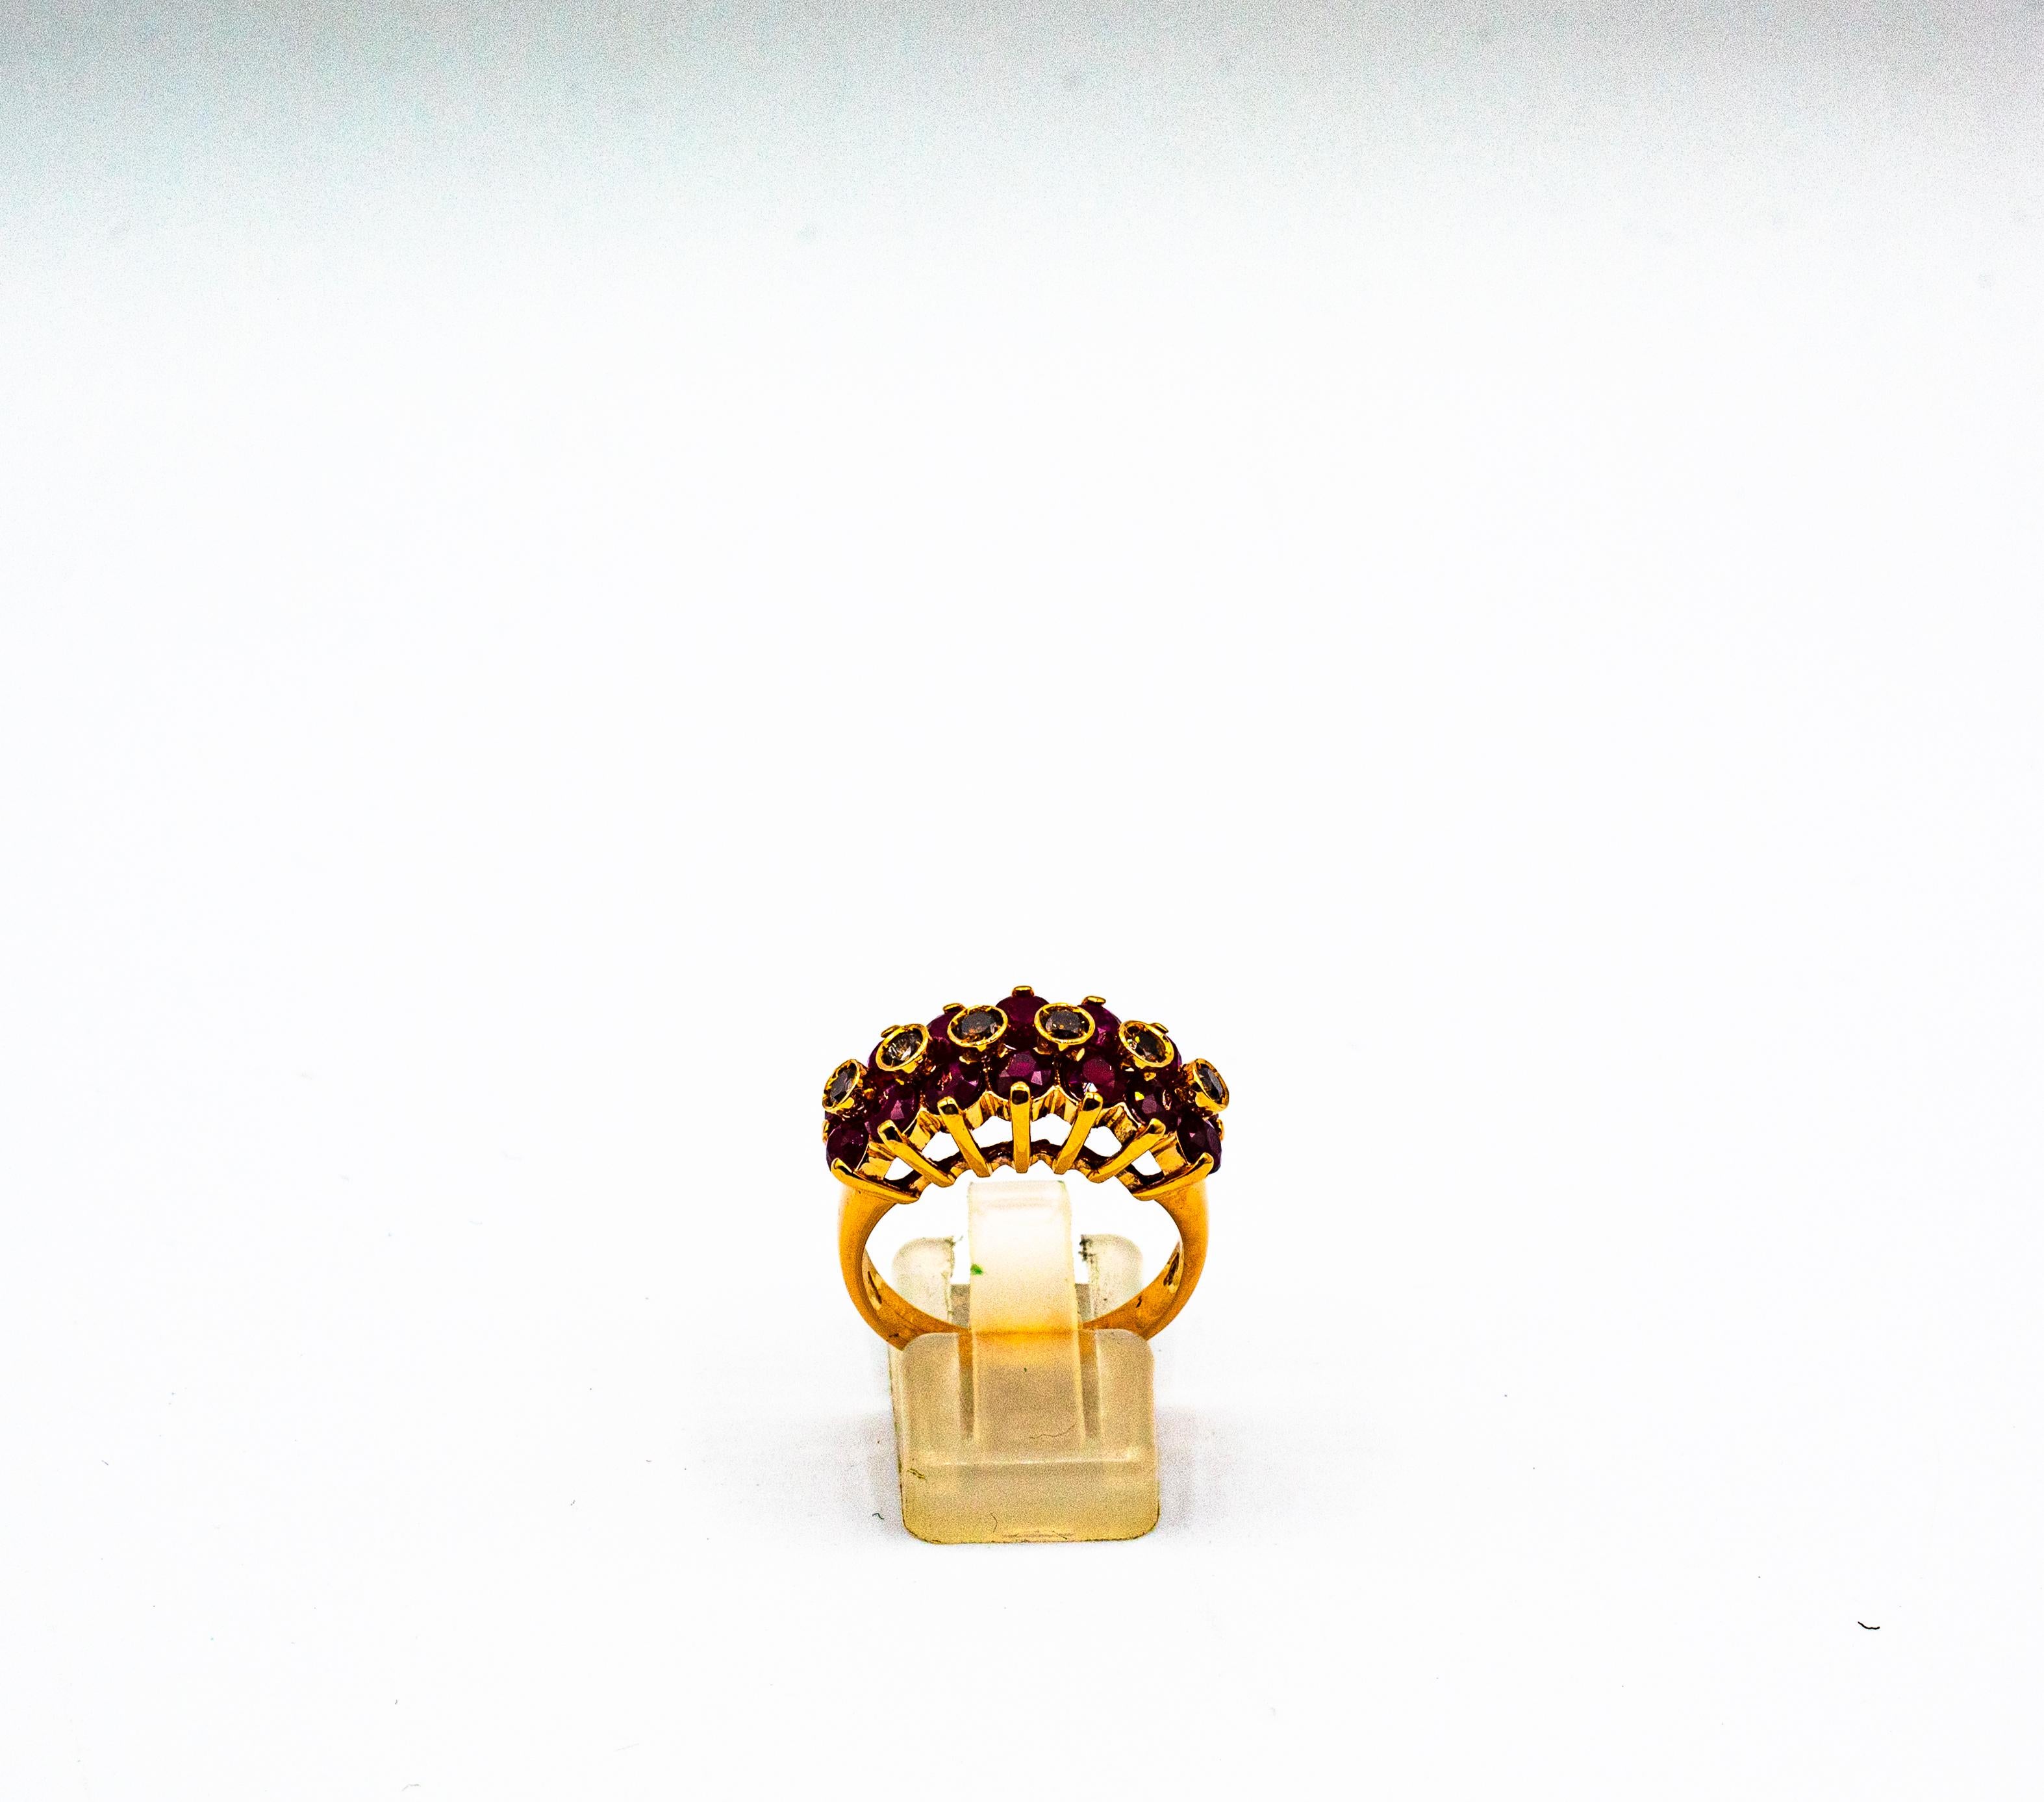 This Ring is made of 9K Yellow Gold.
This Ring has 0.42 Carats of Brown Brilliant Cut Diamonds.
This Ring has 3.65 Carats of Oval Cut Rubies.

This Ring is available also with Emeralds or Blue Sapphires.

Size ITA: 18 USA: 8 1/4

We're a workshop so